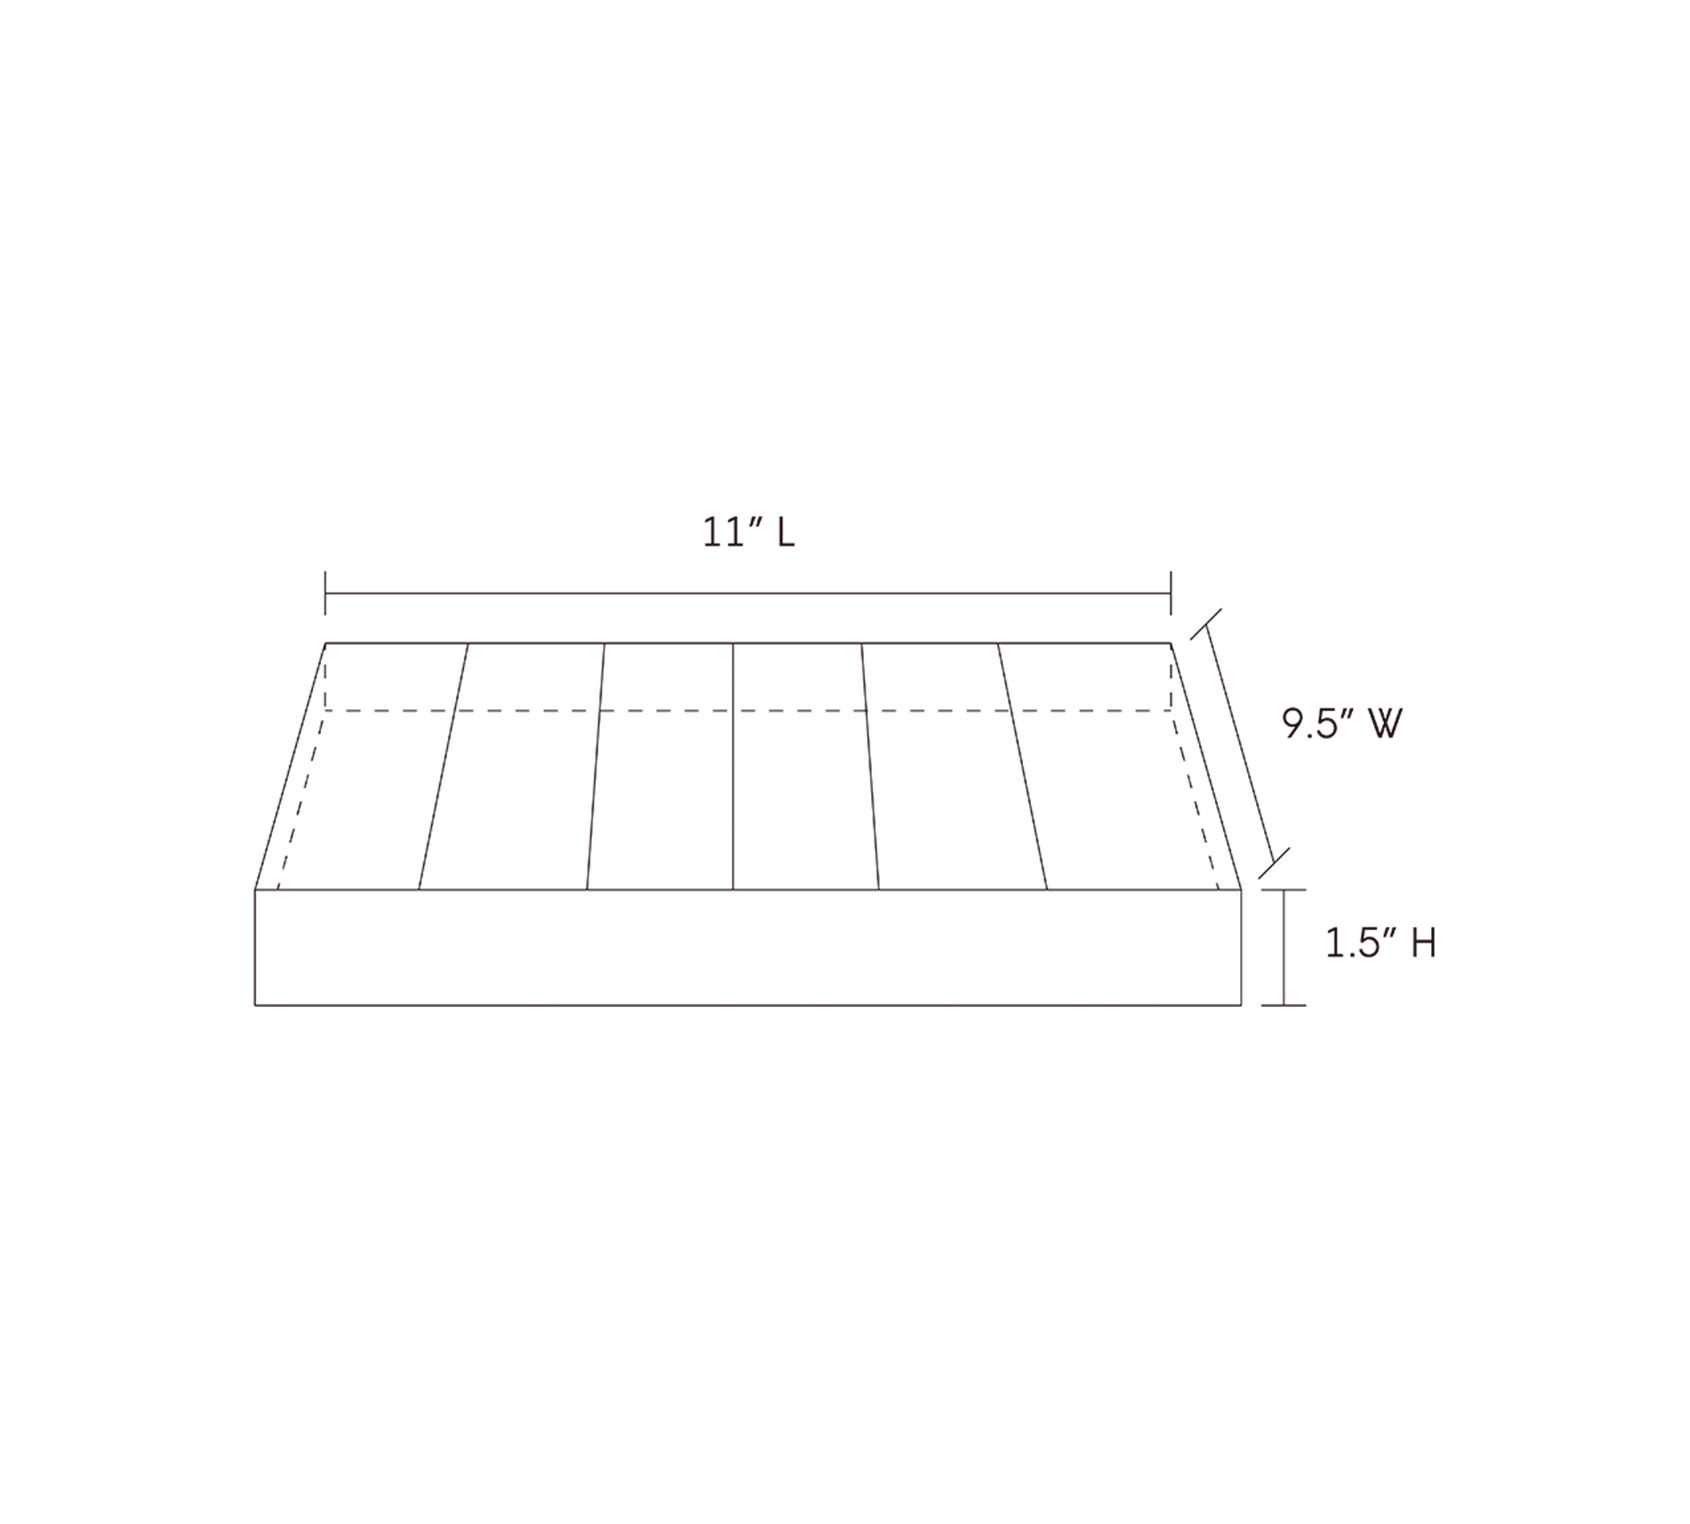 Line drawing of the 6V tray with dimensions of 11 inches in length, 9.5 inches in width, and 1.5 inches in height